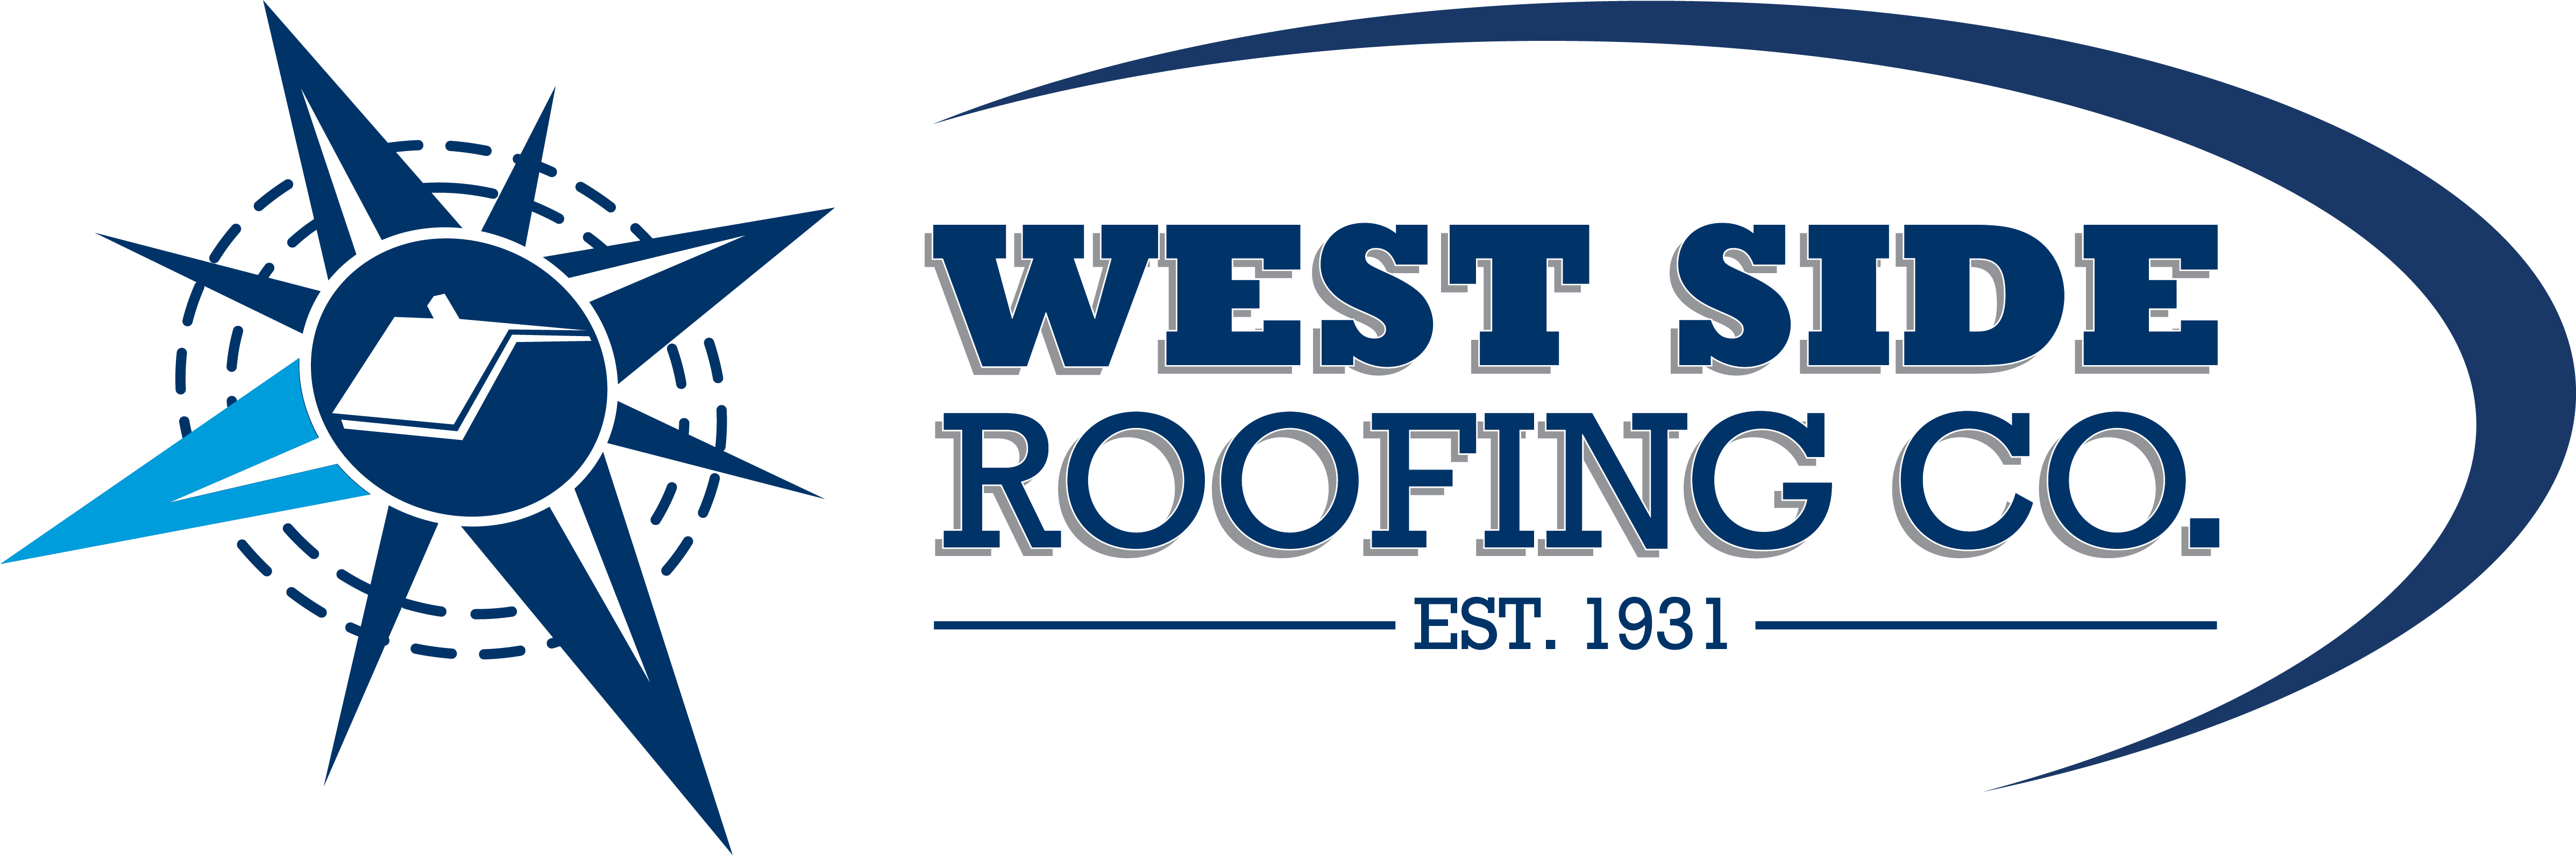 West Side Roofing roofing company in Ohio